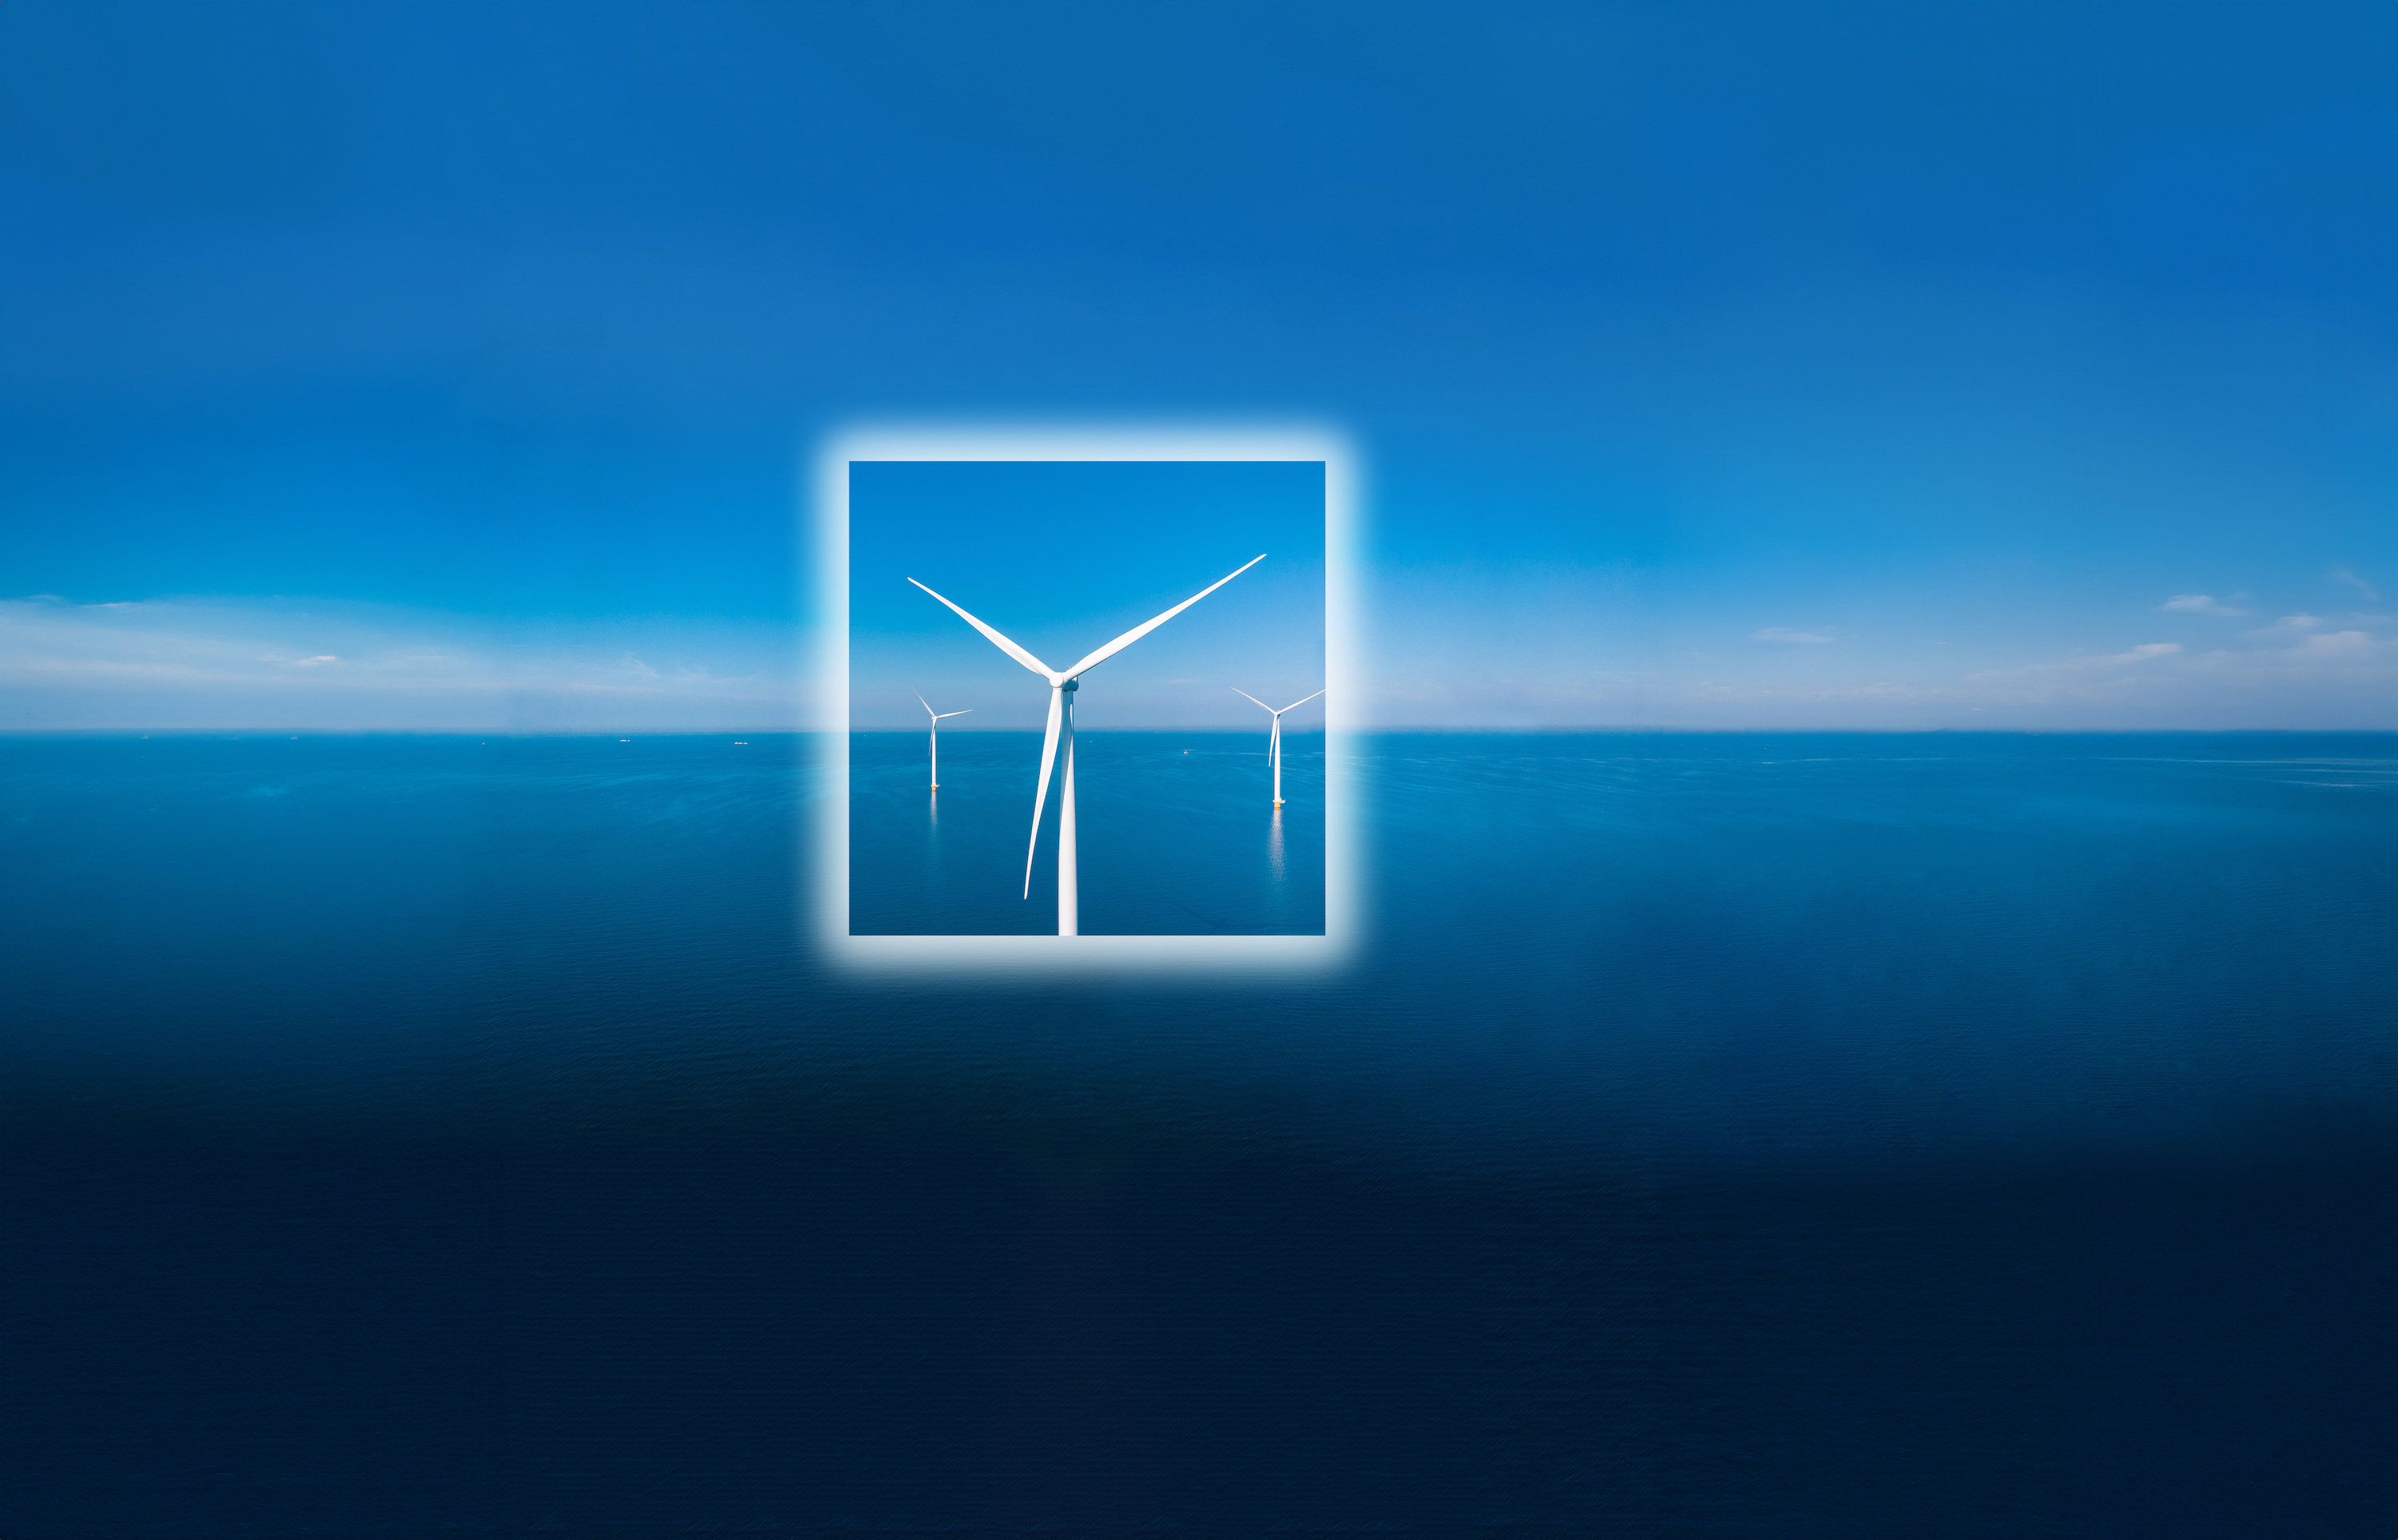 A white wind turbine sits in the middle of an ocean framed by a white square.